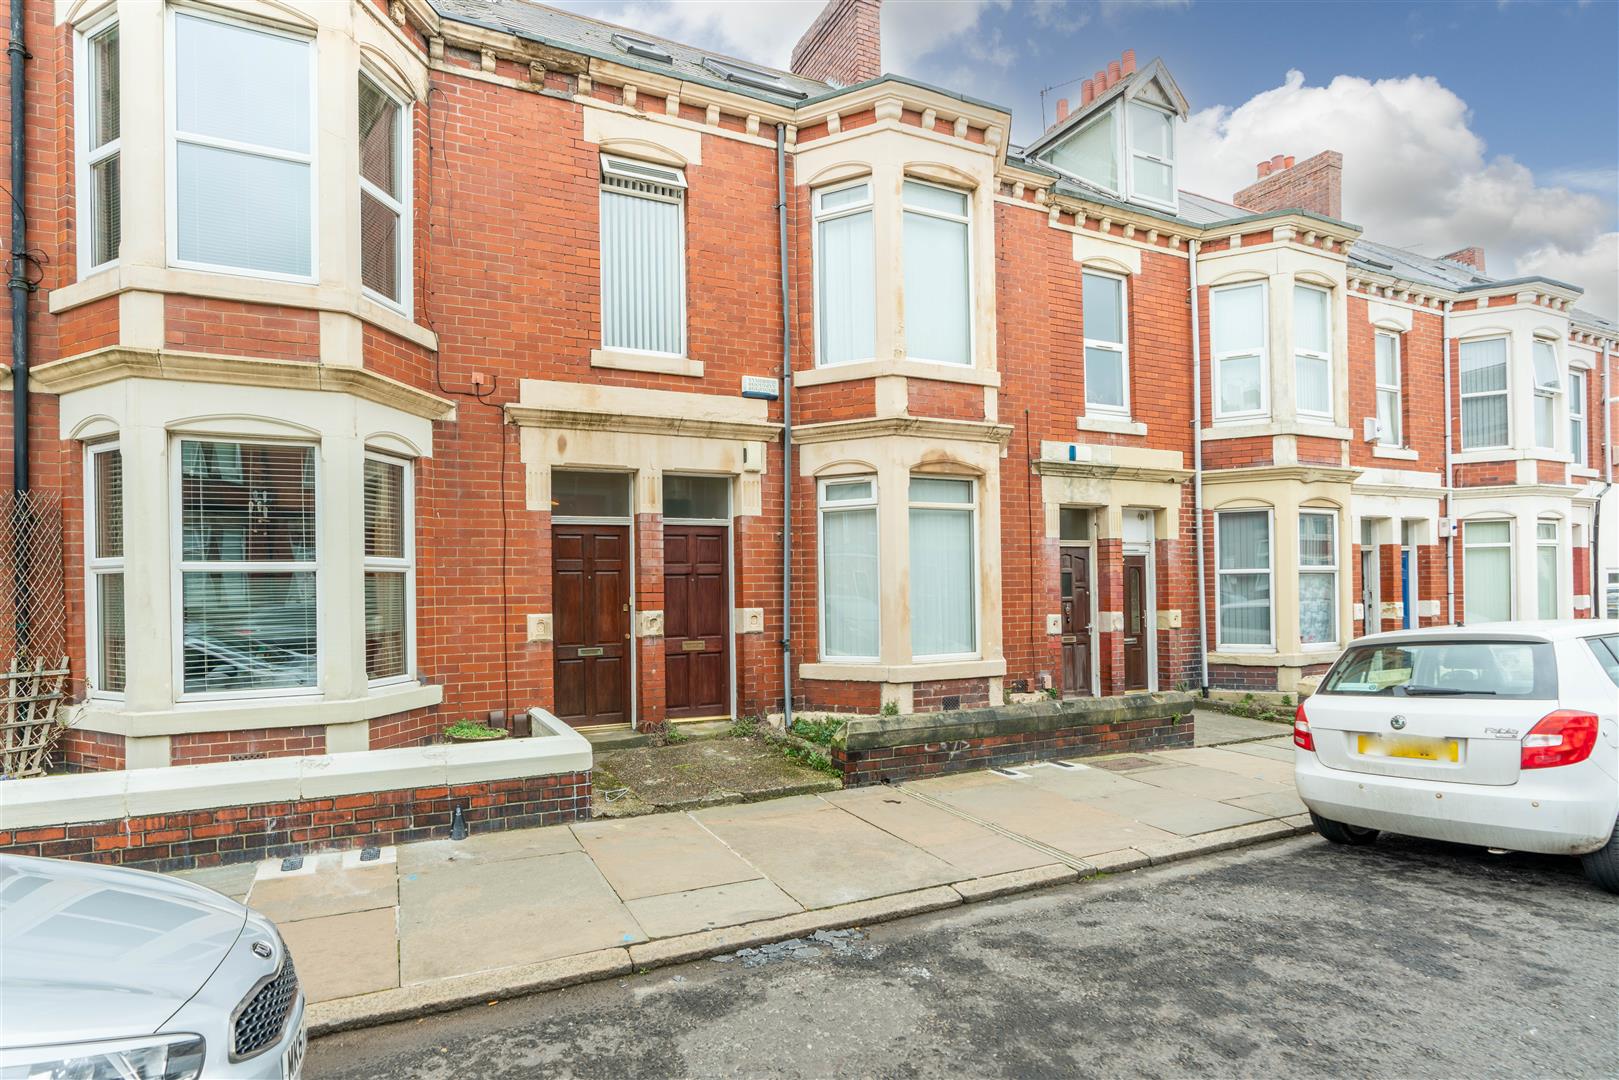 5 bed flat for sale in Addycombe Terrace, Newcastle upon Tyne, NE6 